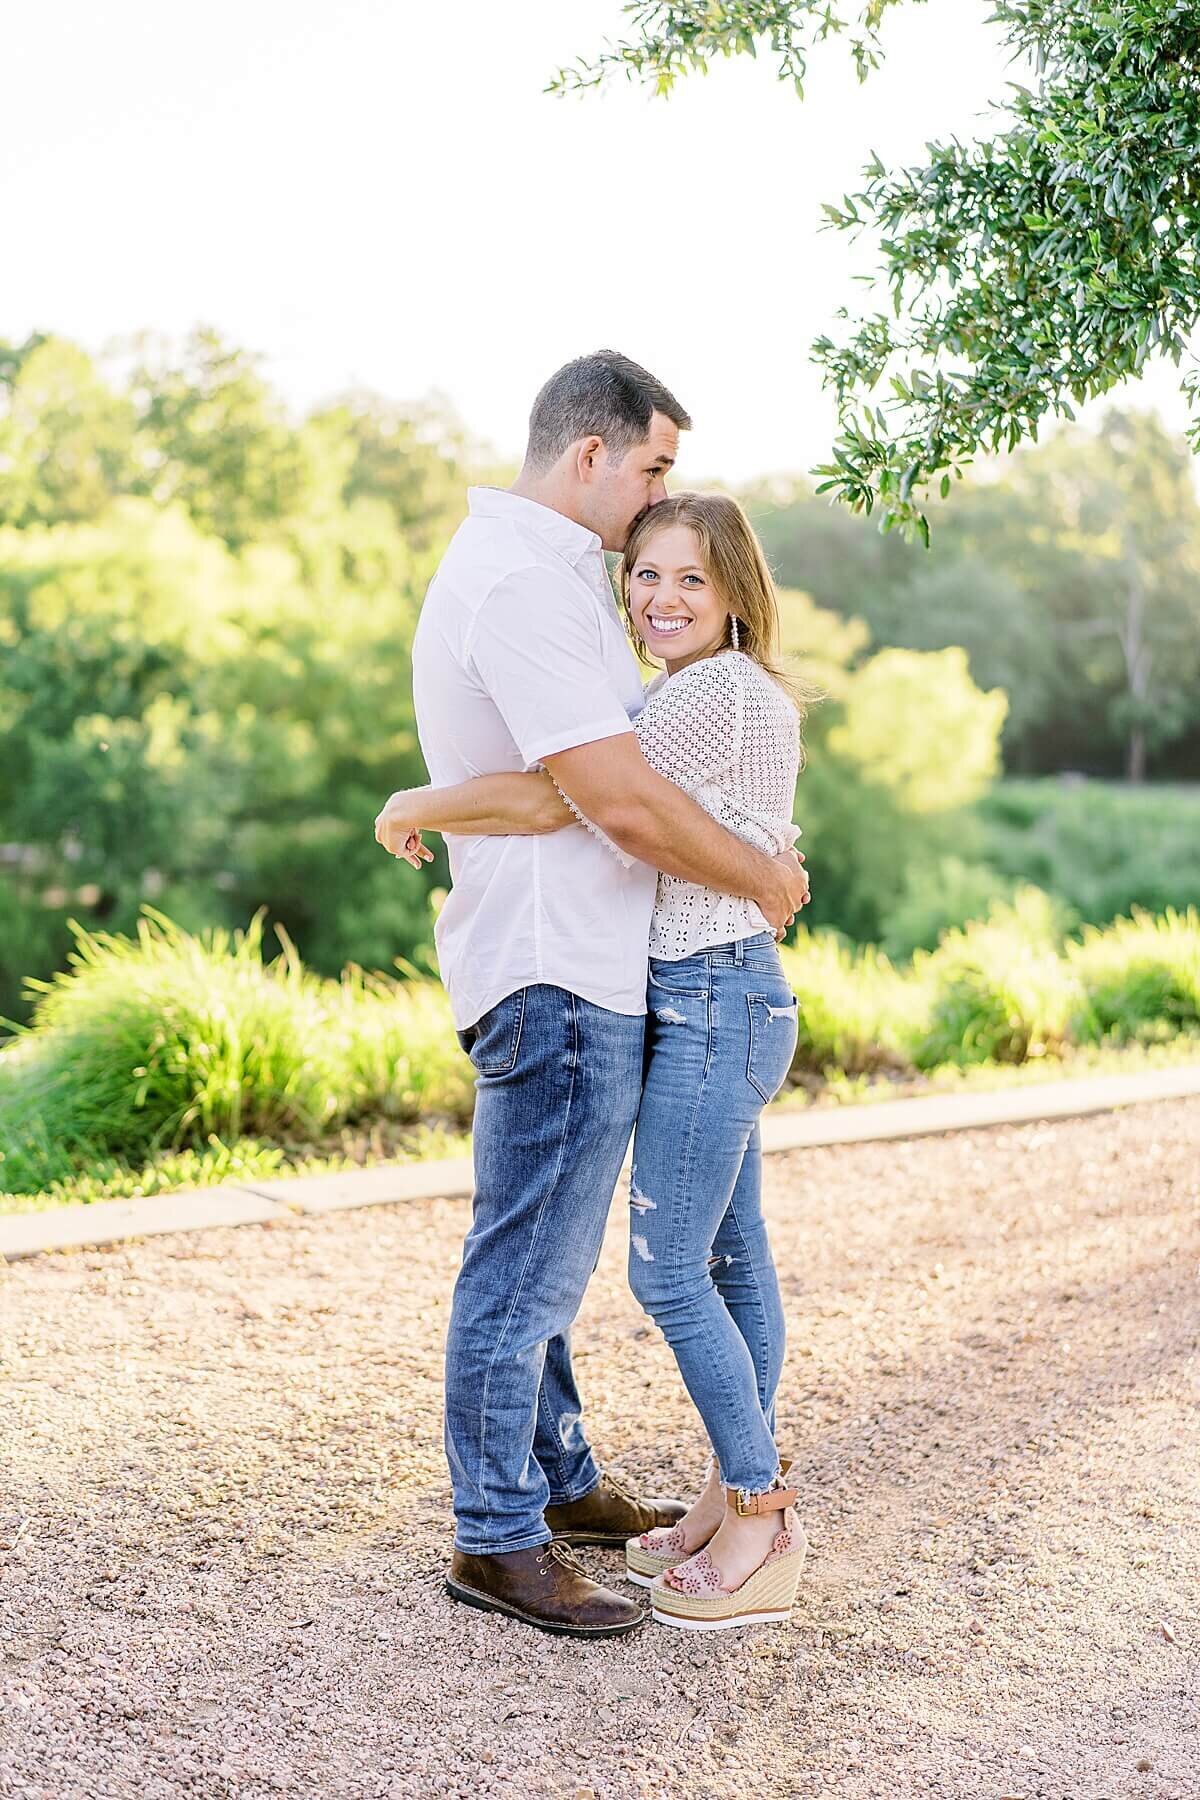 McGovern-Centennial-Gardens-Hermann-Park-Engagement-Session-Alicia-Yarrish-Photography_0004